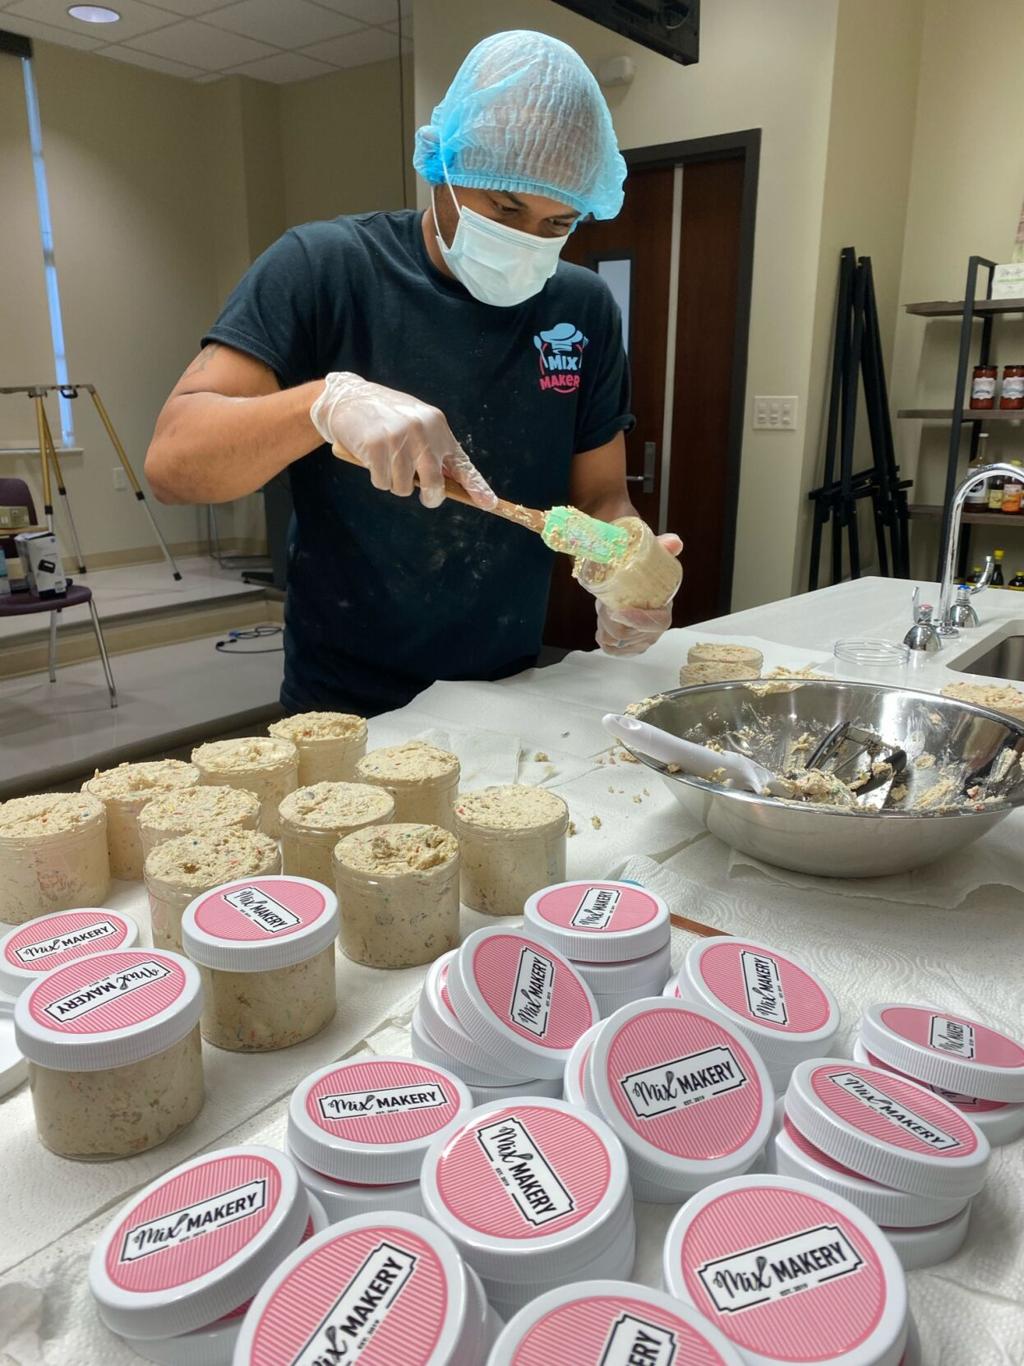 Mix Makery: A diabetes diagnosis spurred couple to start plant-based cookie  dough company, Food/Restaurants